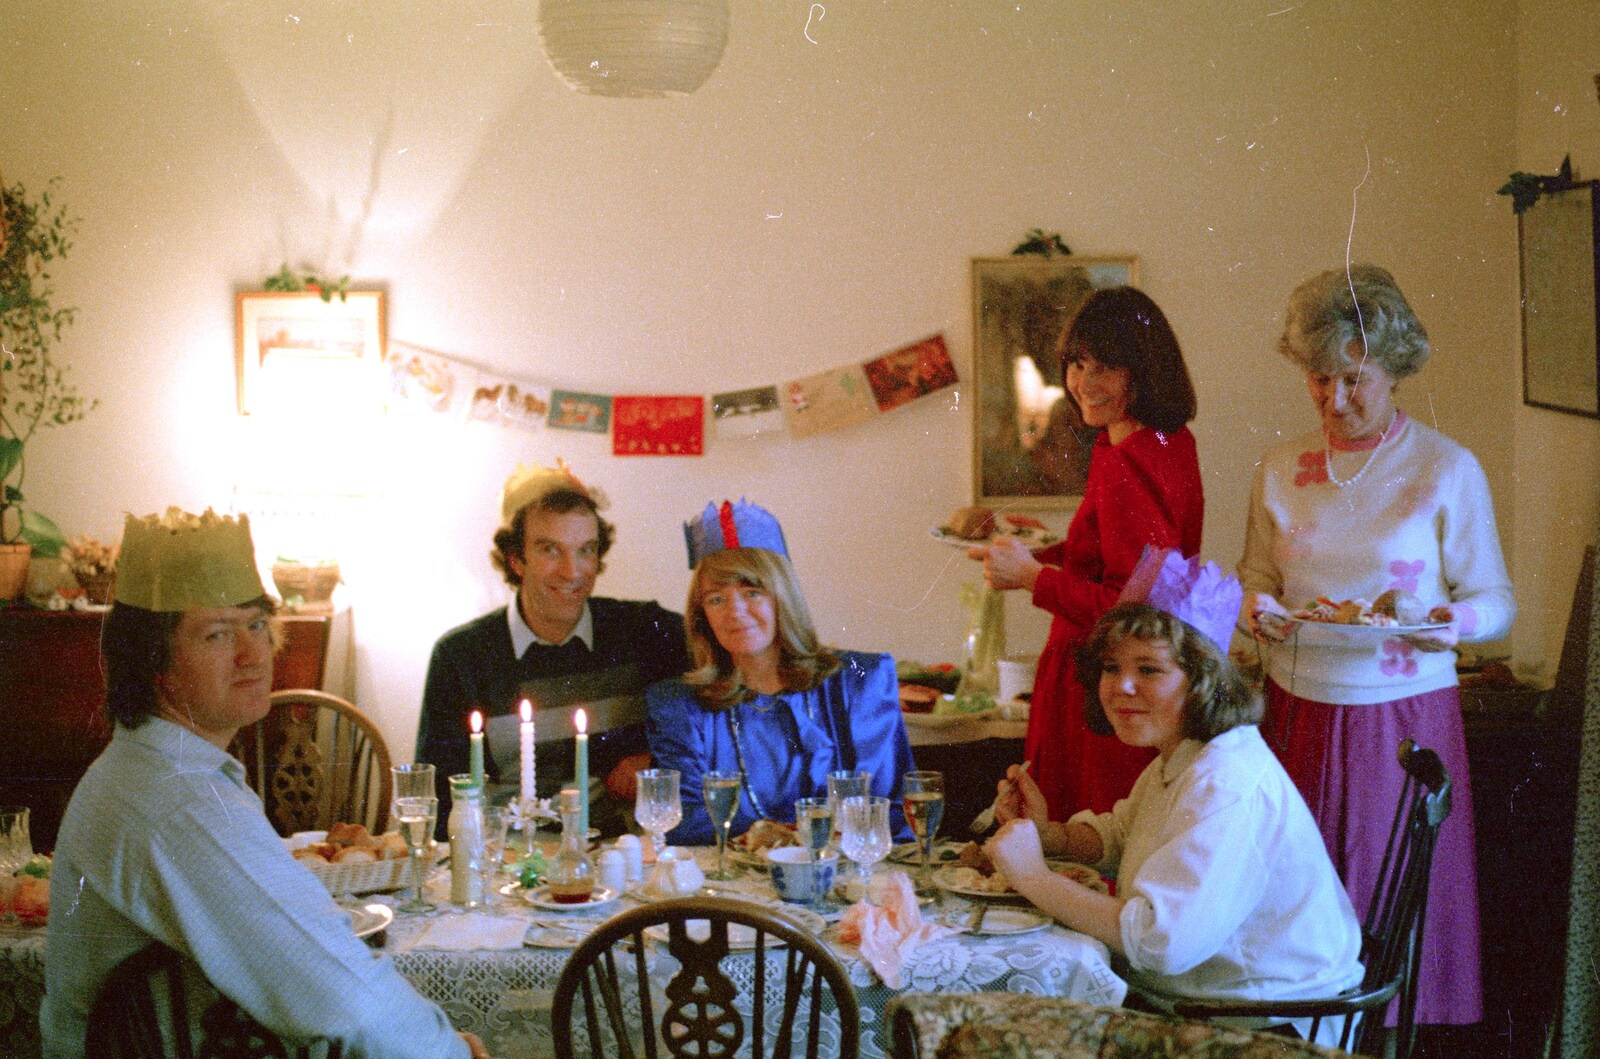 Neil, Mike, Mother, Caroline, Sis and Grandmother from Christmas with Neil and Caroline, Burton, Dorset - 25th December 1986